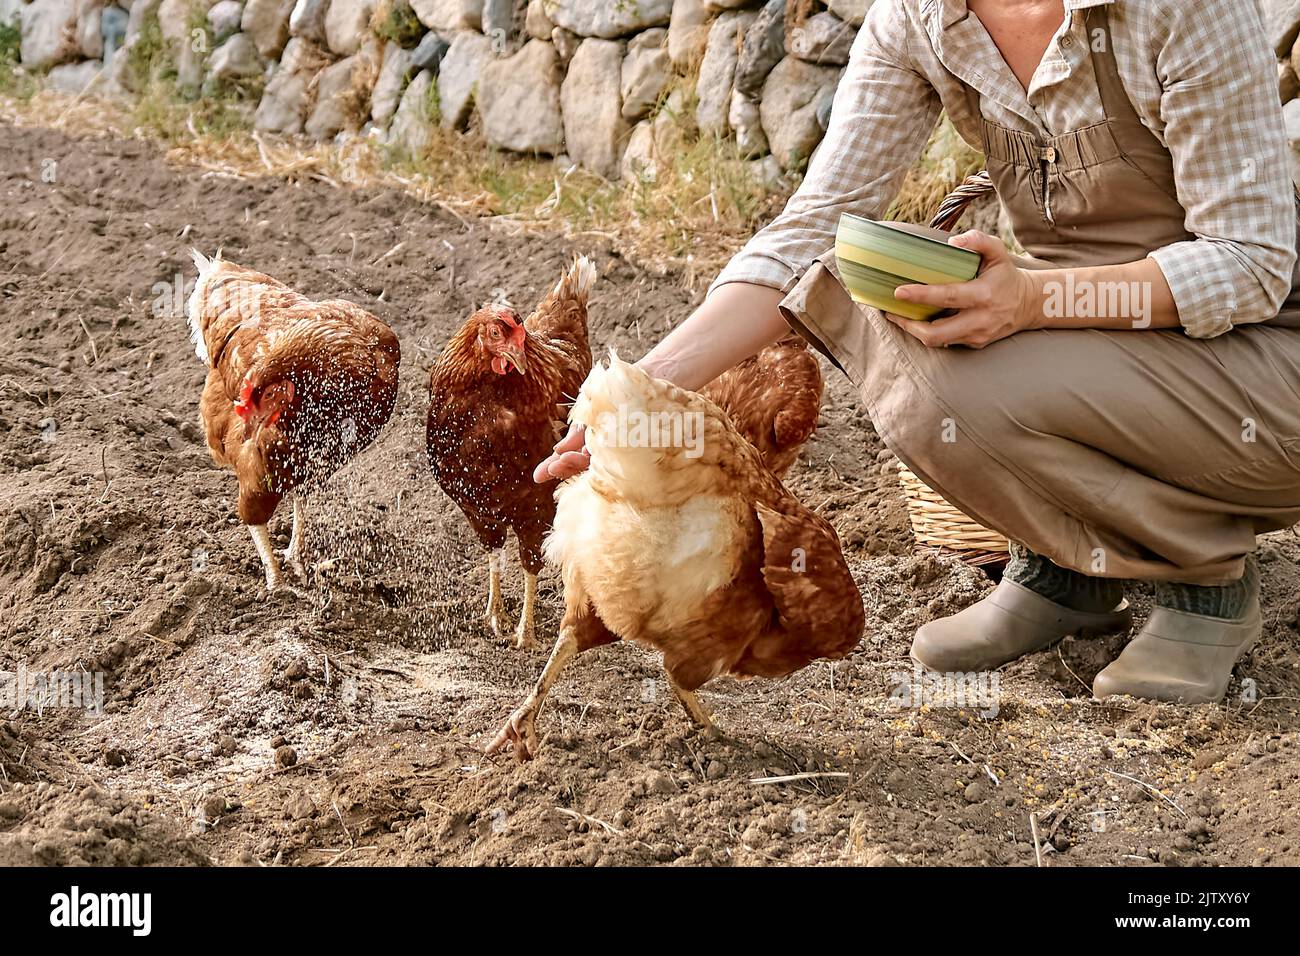 Woman feeding hens from hand in the farm. Free-grazing domestic hen on a traditional free range poultry organic farm. Stock Photo